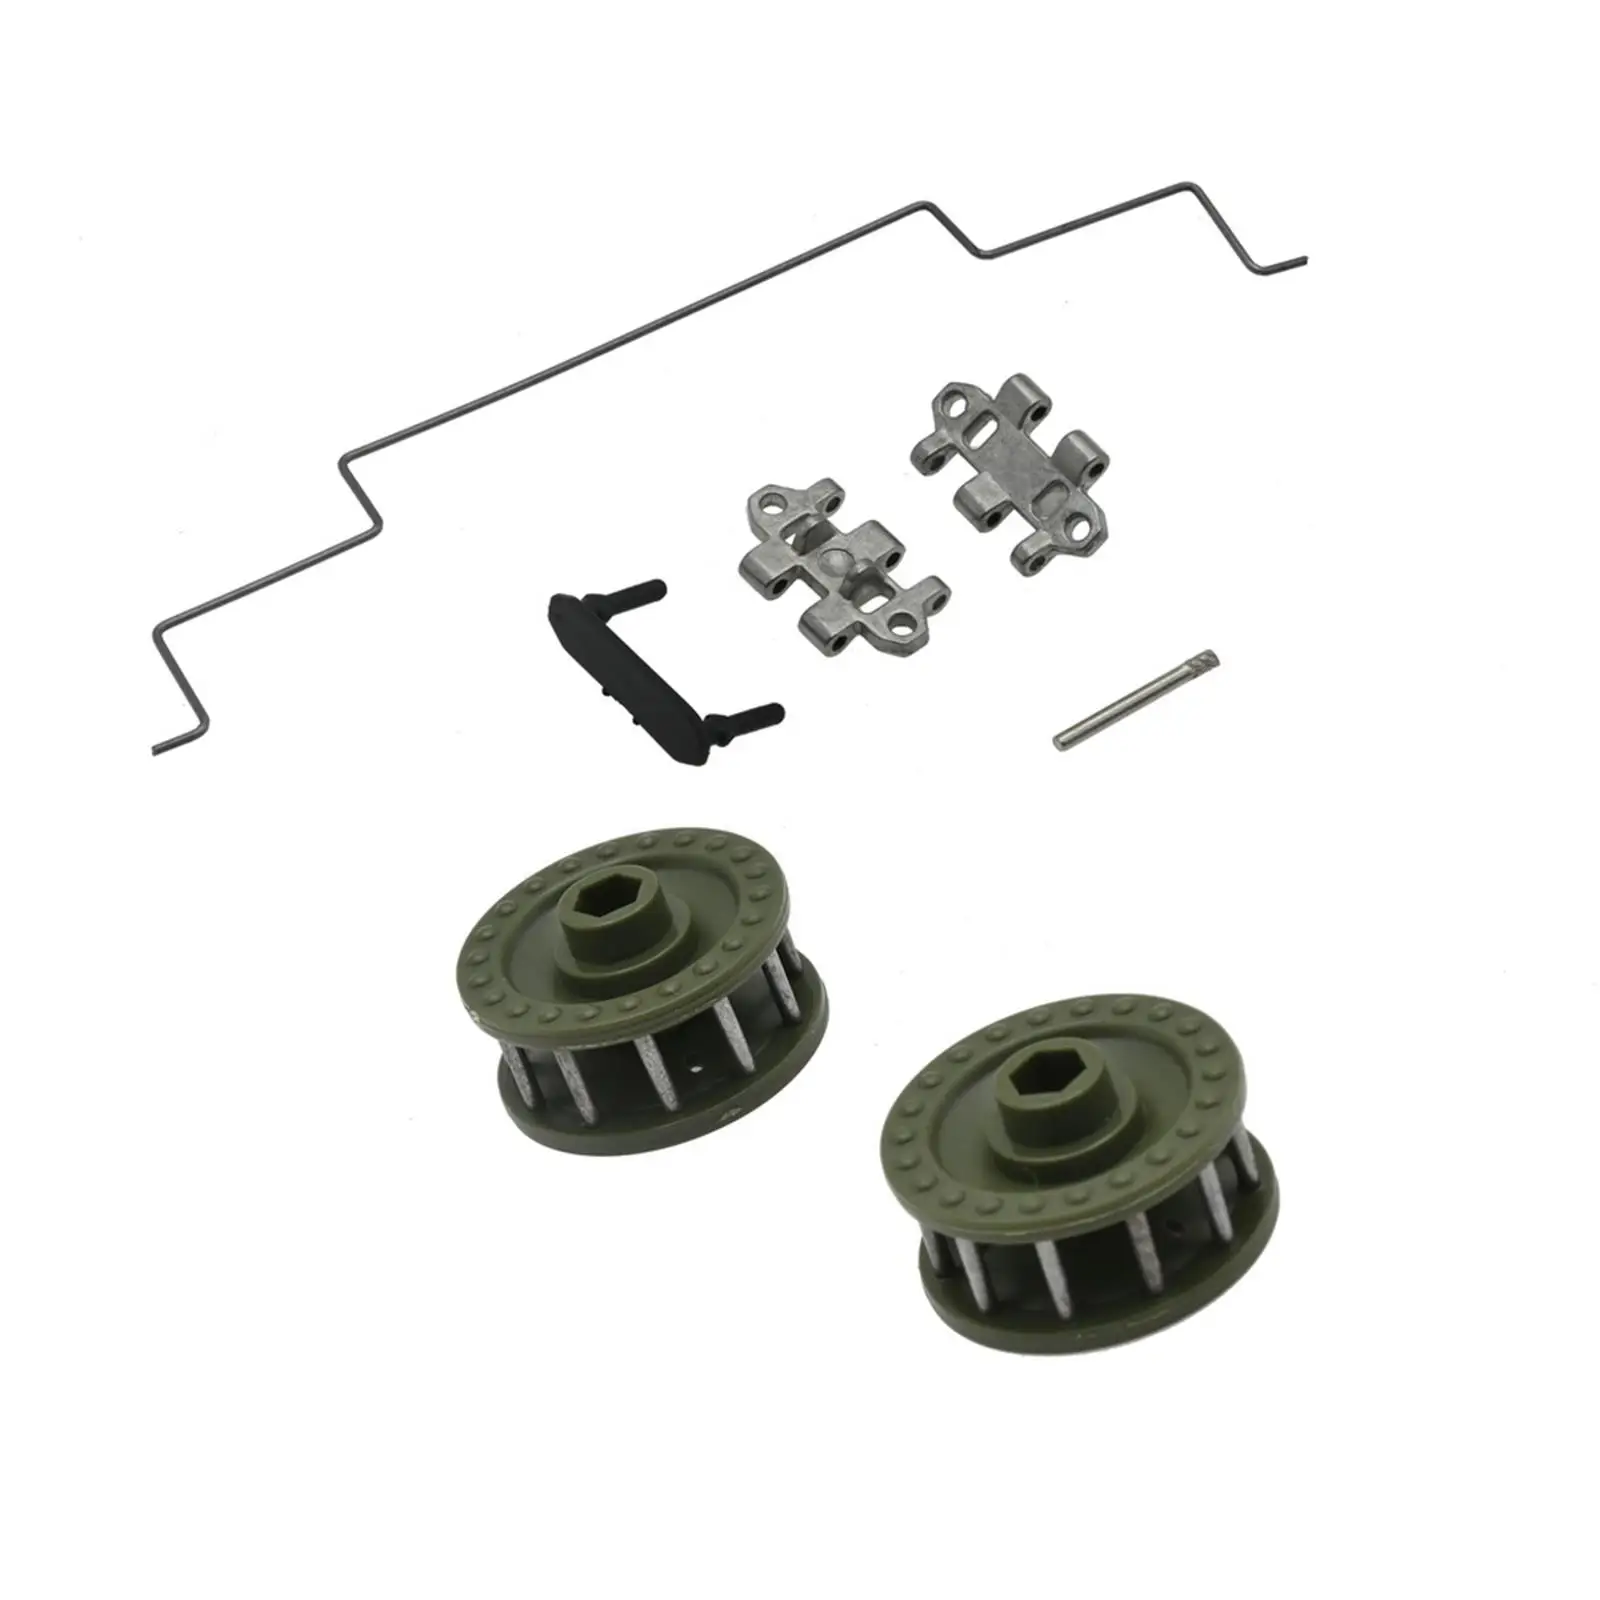 RC Clawler Chains Replace Parts Upgrade Parts for Tracked Vehicle DIY Accs